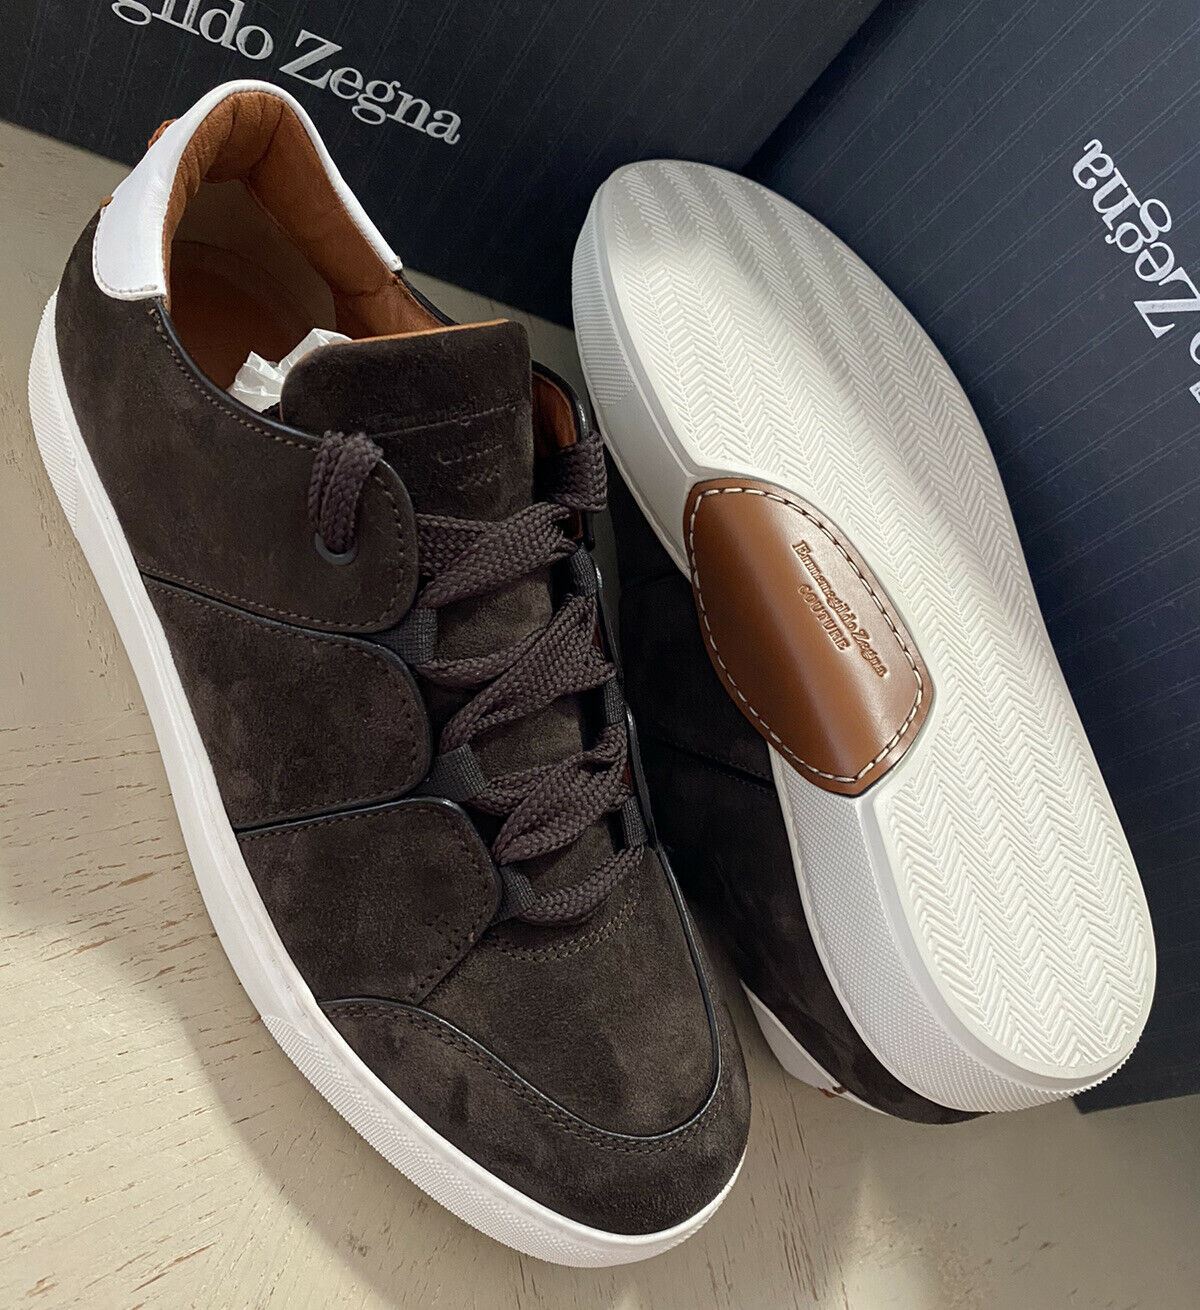 New $850 Ermenegildo Zegna Couture Suede/Leather Sneakers Shoes DK Brown 9.5 US